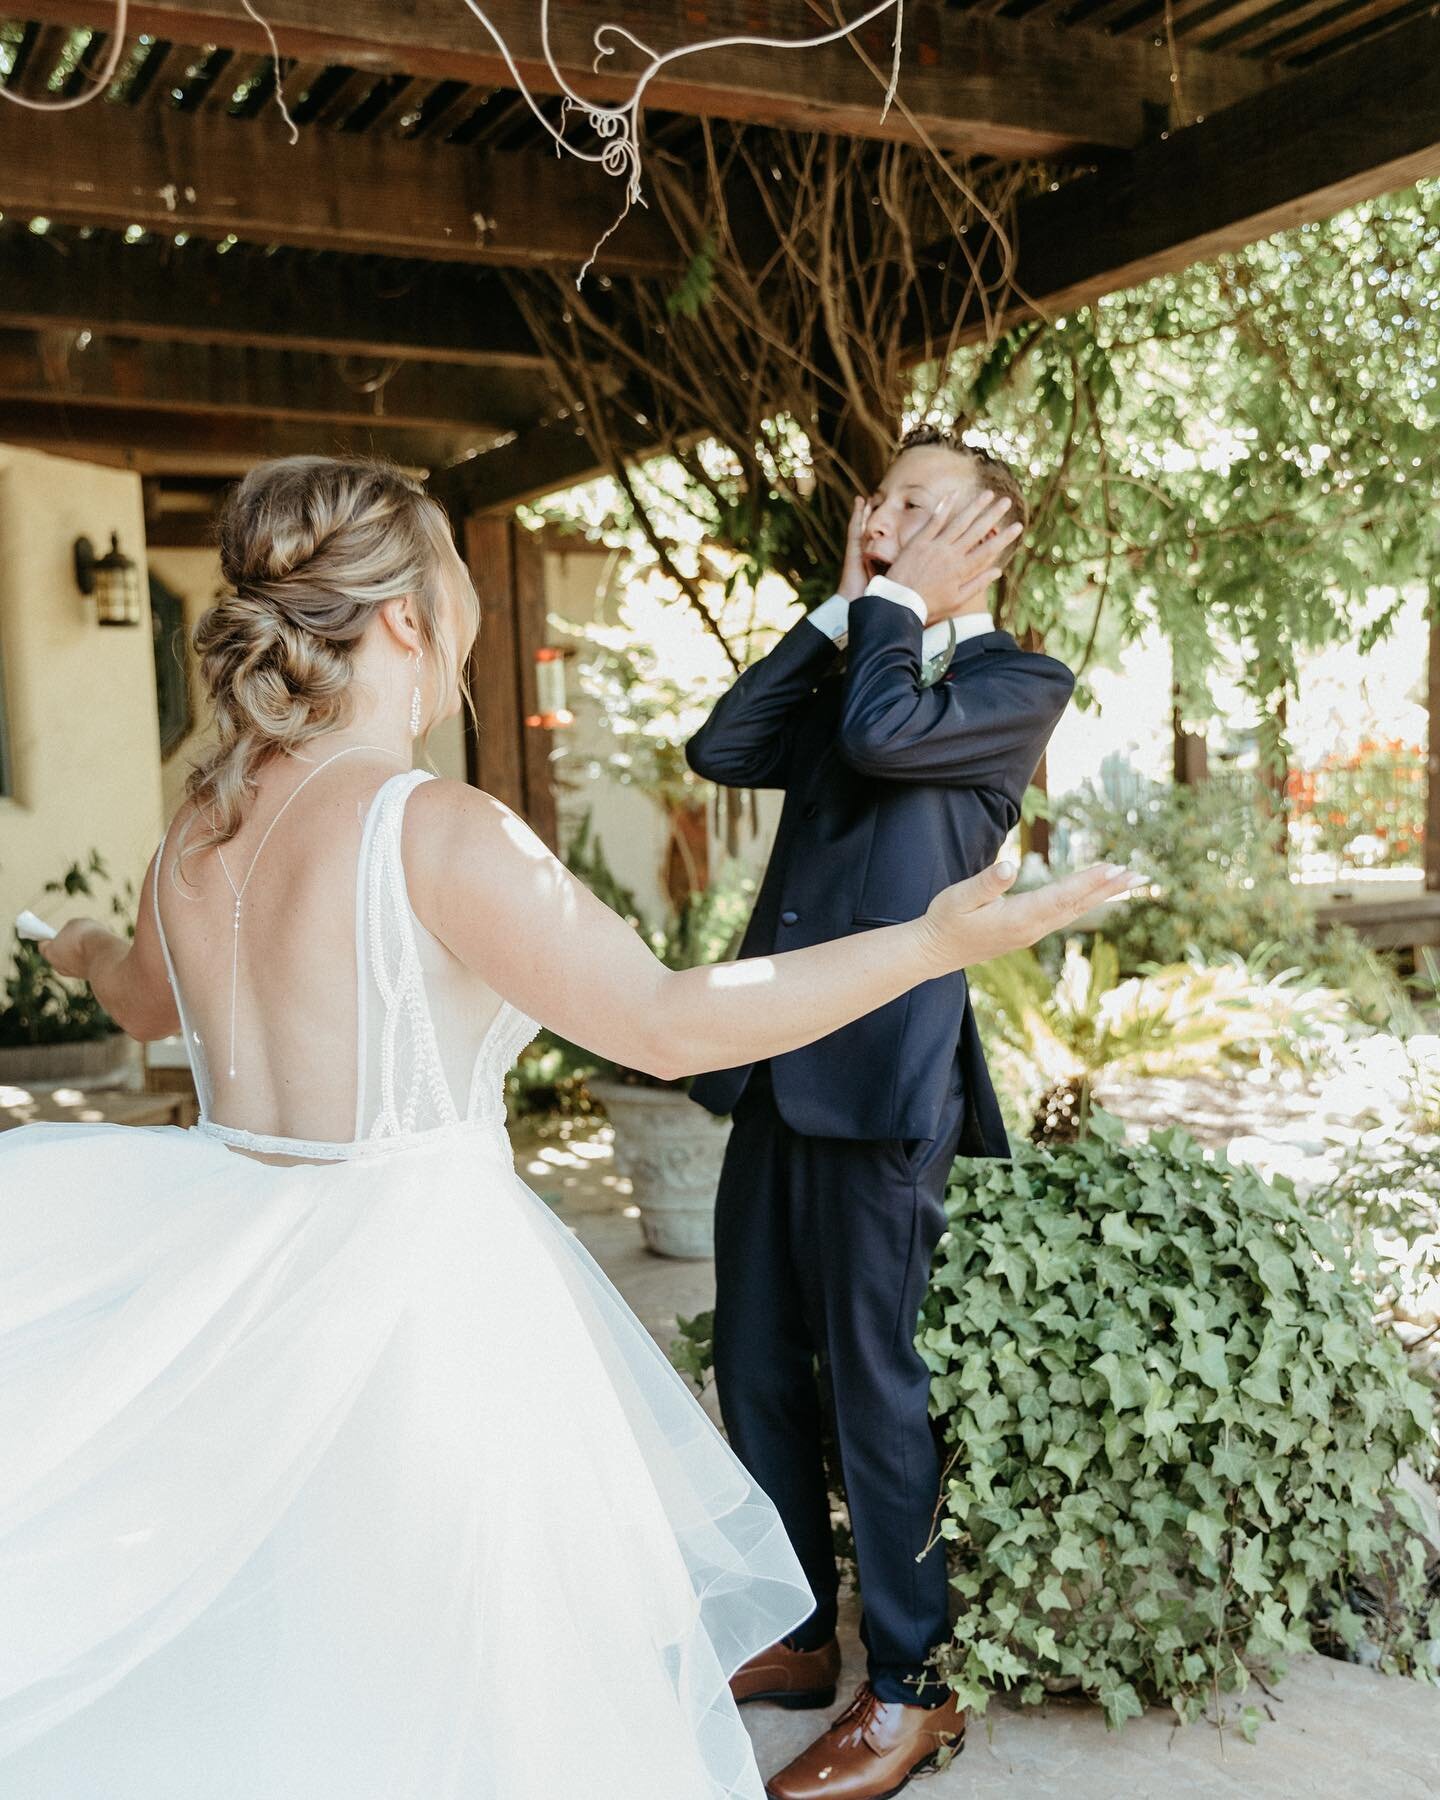 The first look looked a bit different on 5.14.22. His reaction to seeing his Mom before she married the love of her life left no eye dry. 
.
.
.
Venue: @willowandoakestate 
Planning: @mady.bell.events 
Photographer: @the.randolphs 
Hospitality: @criu